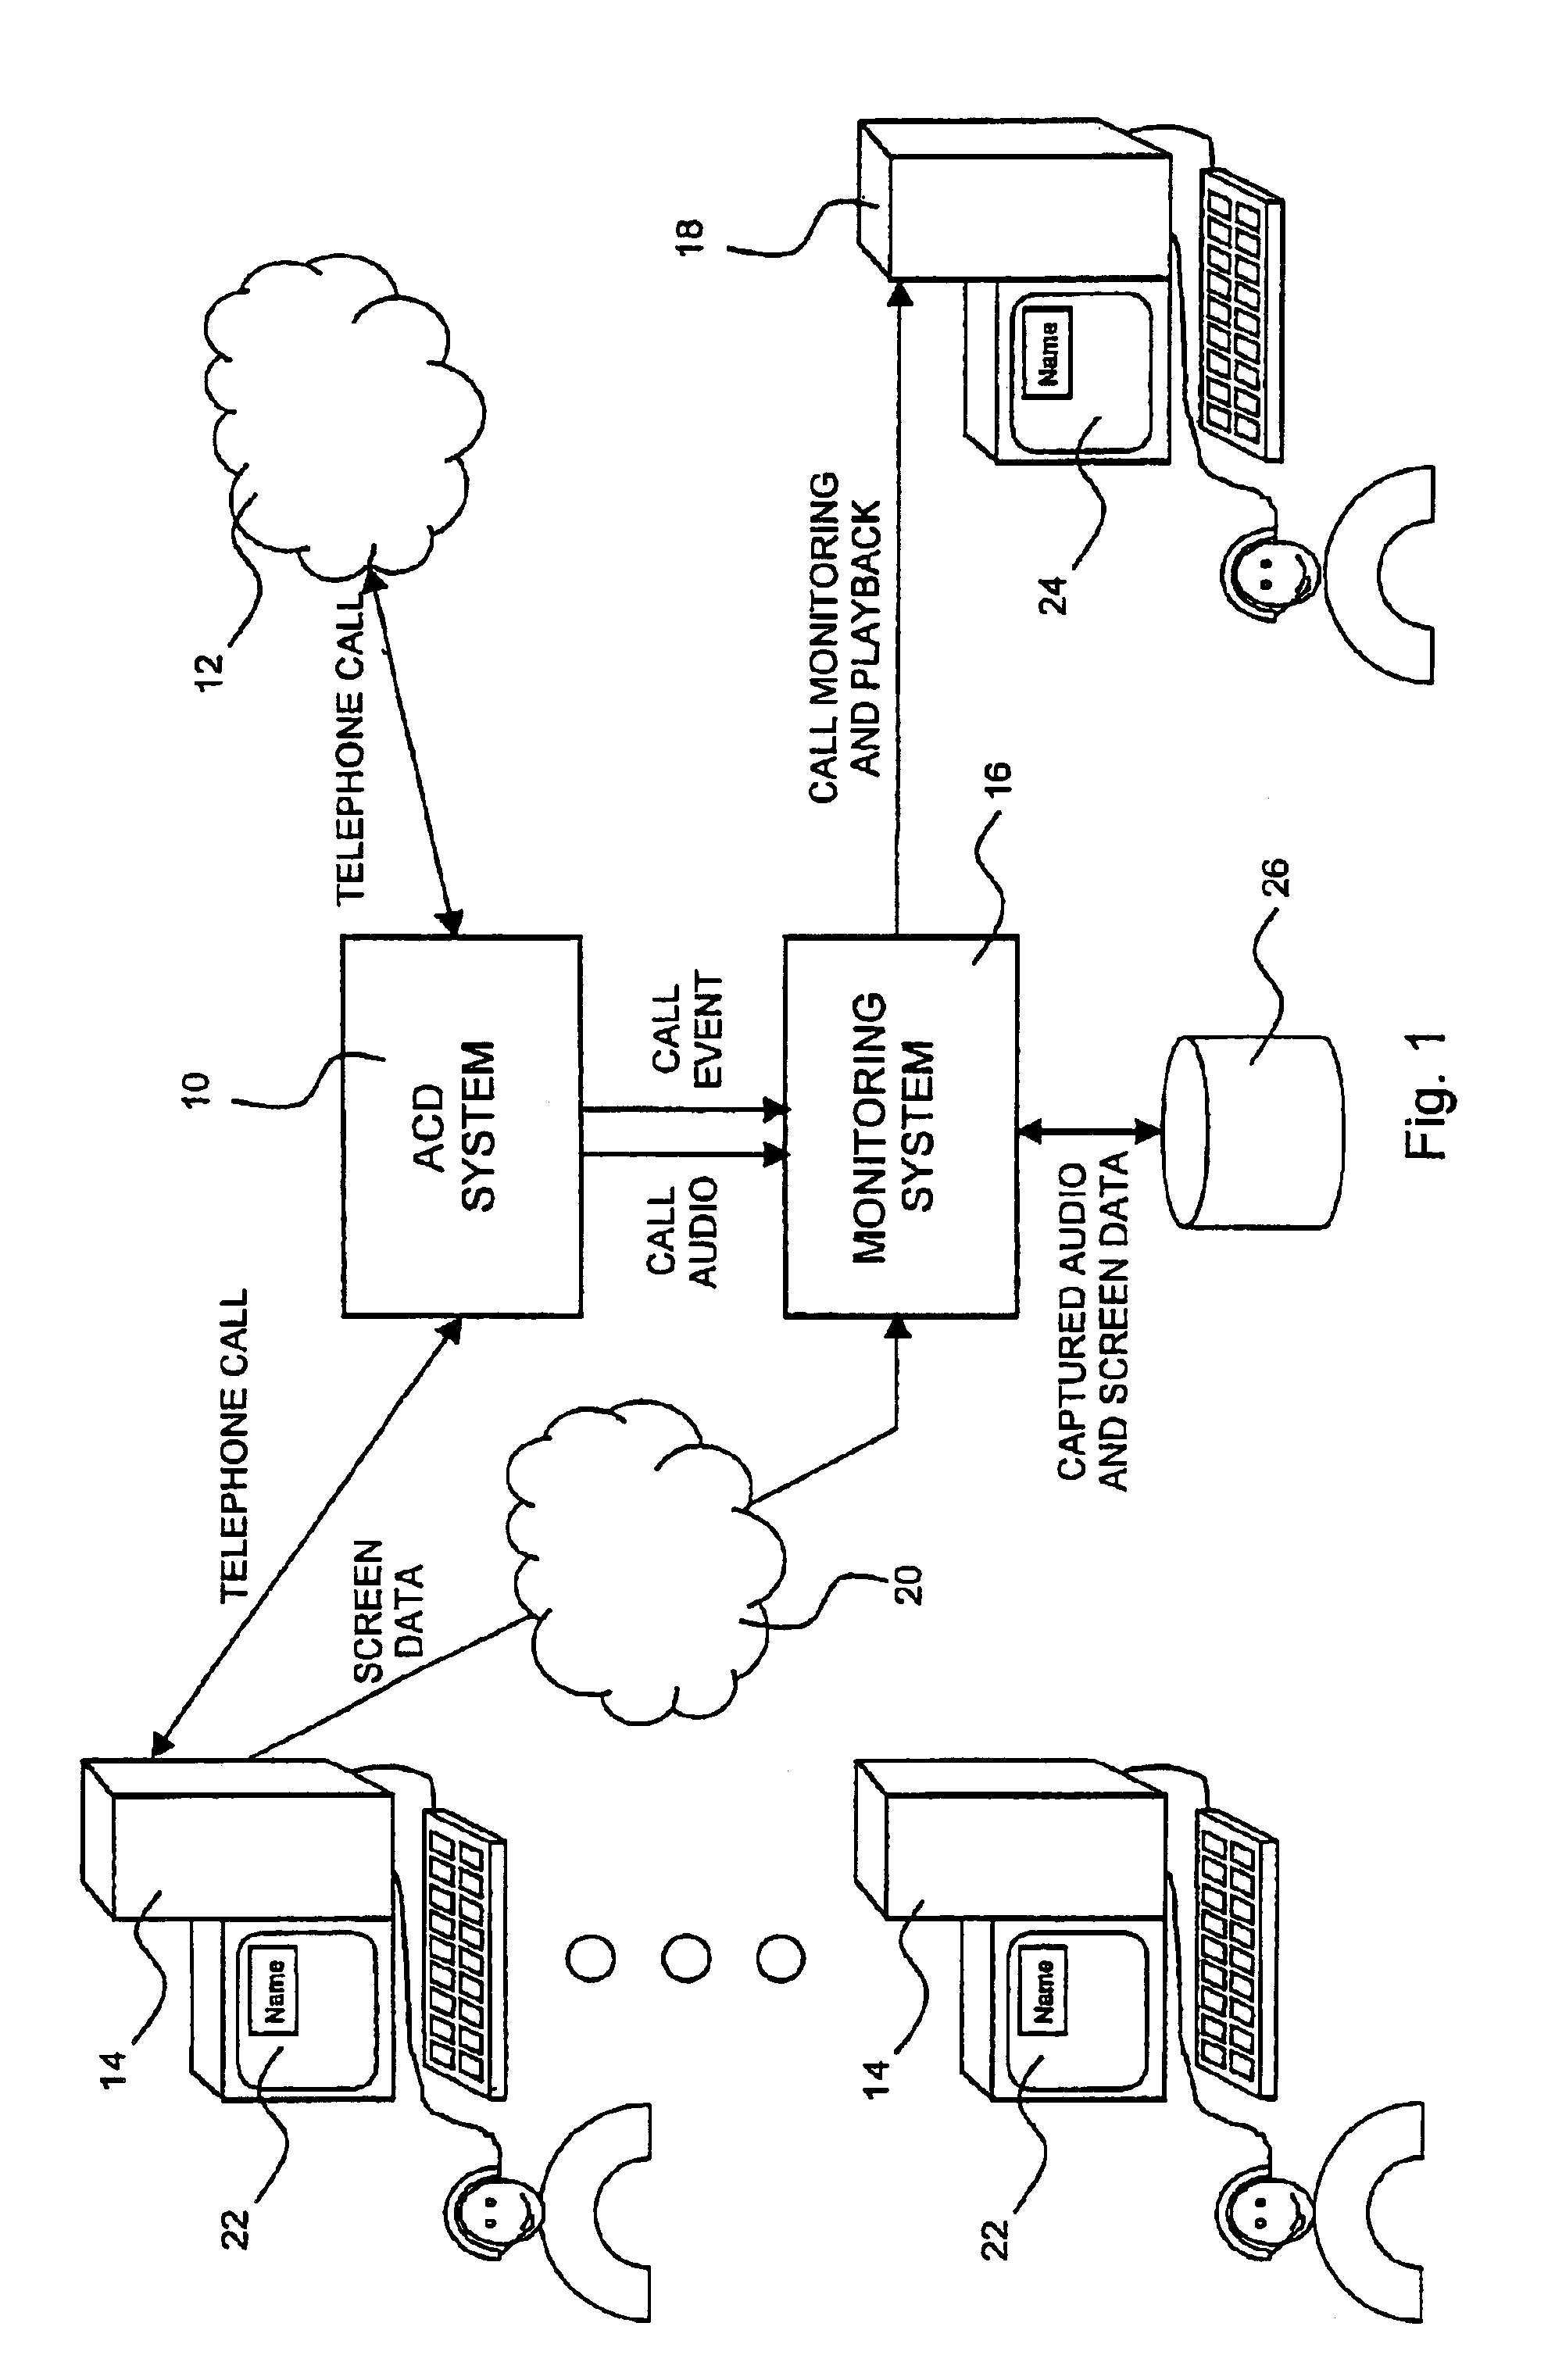 Telephone call monitoring system